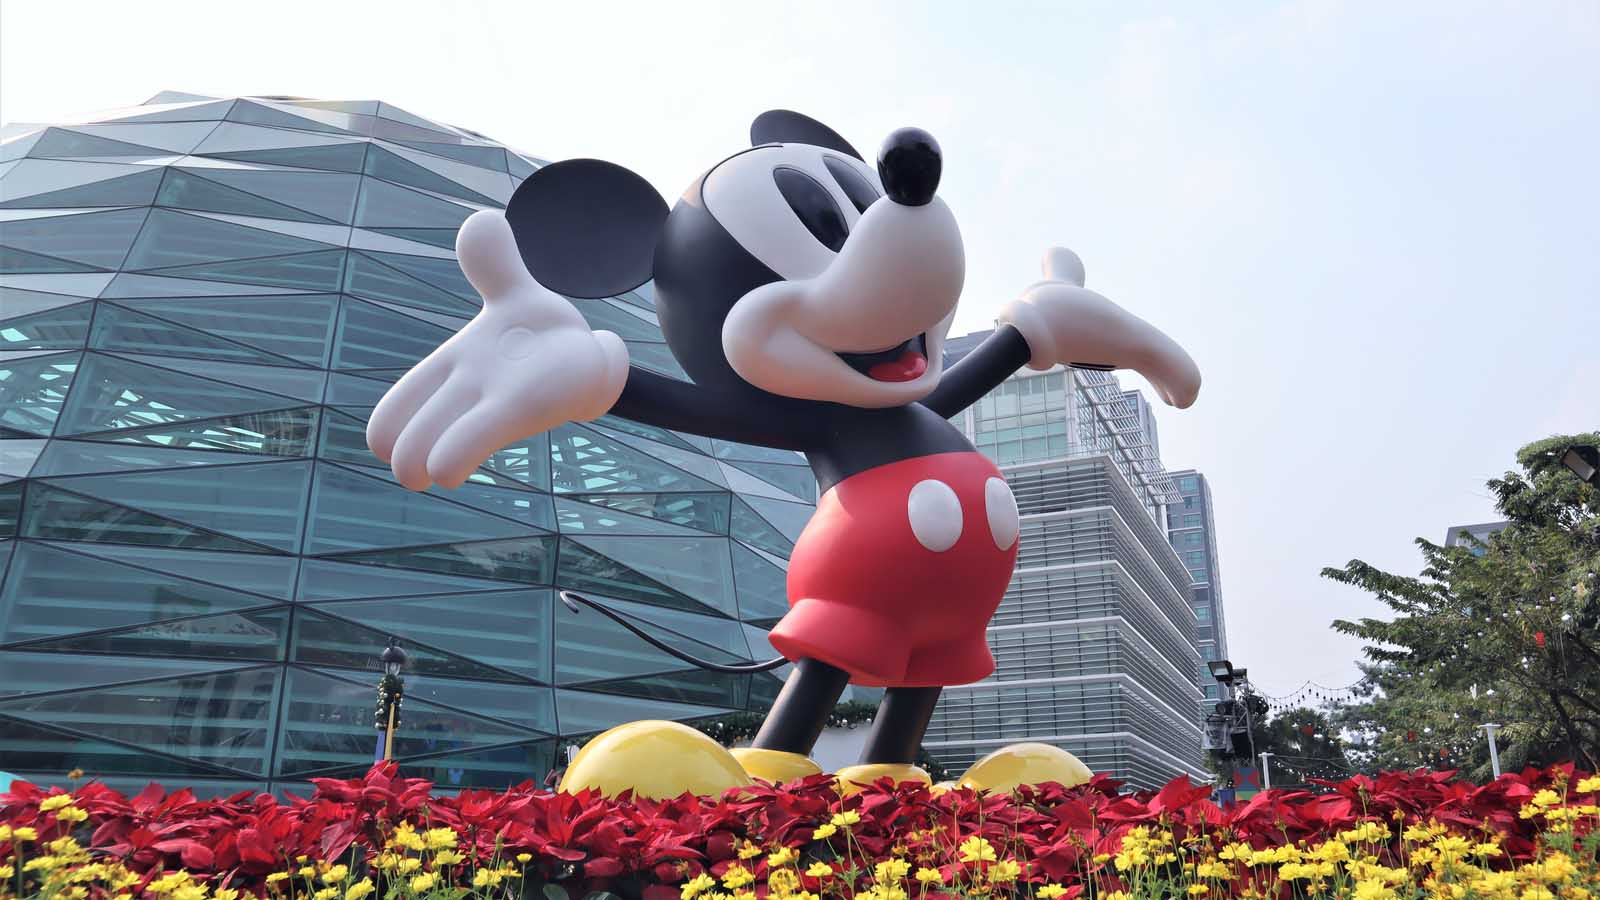 Statue of Disney's (DIS) Mickey Mouse in Bangkok, Thailand.